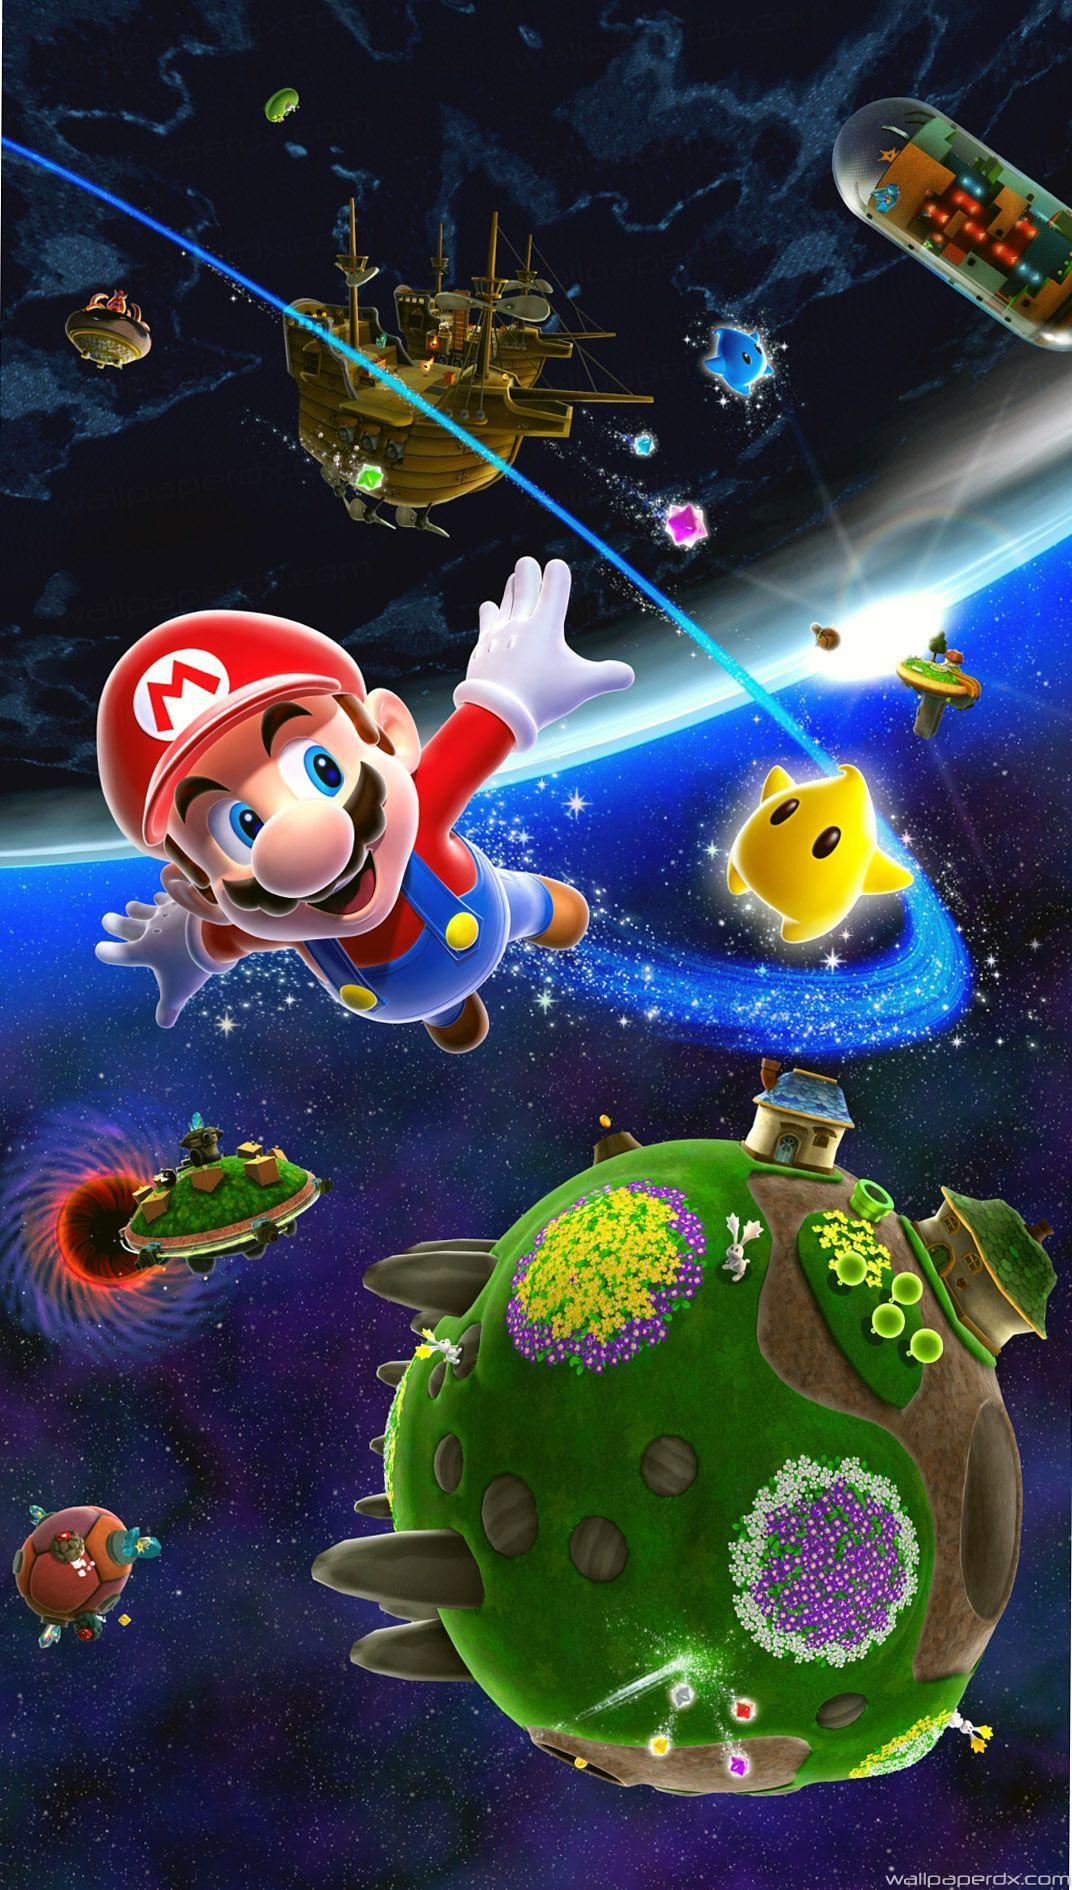 Super Mario Galaxy Iphone Wallpapers Top Free Super Mario Galaxy Iphone Backgrounds Wallpaperaccess